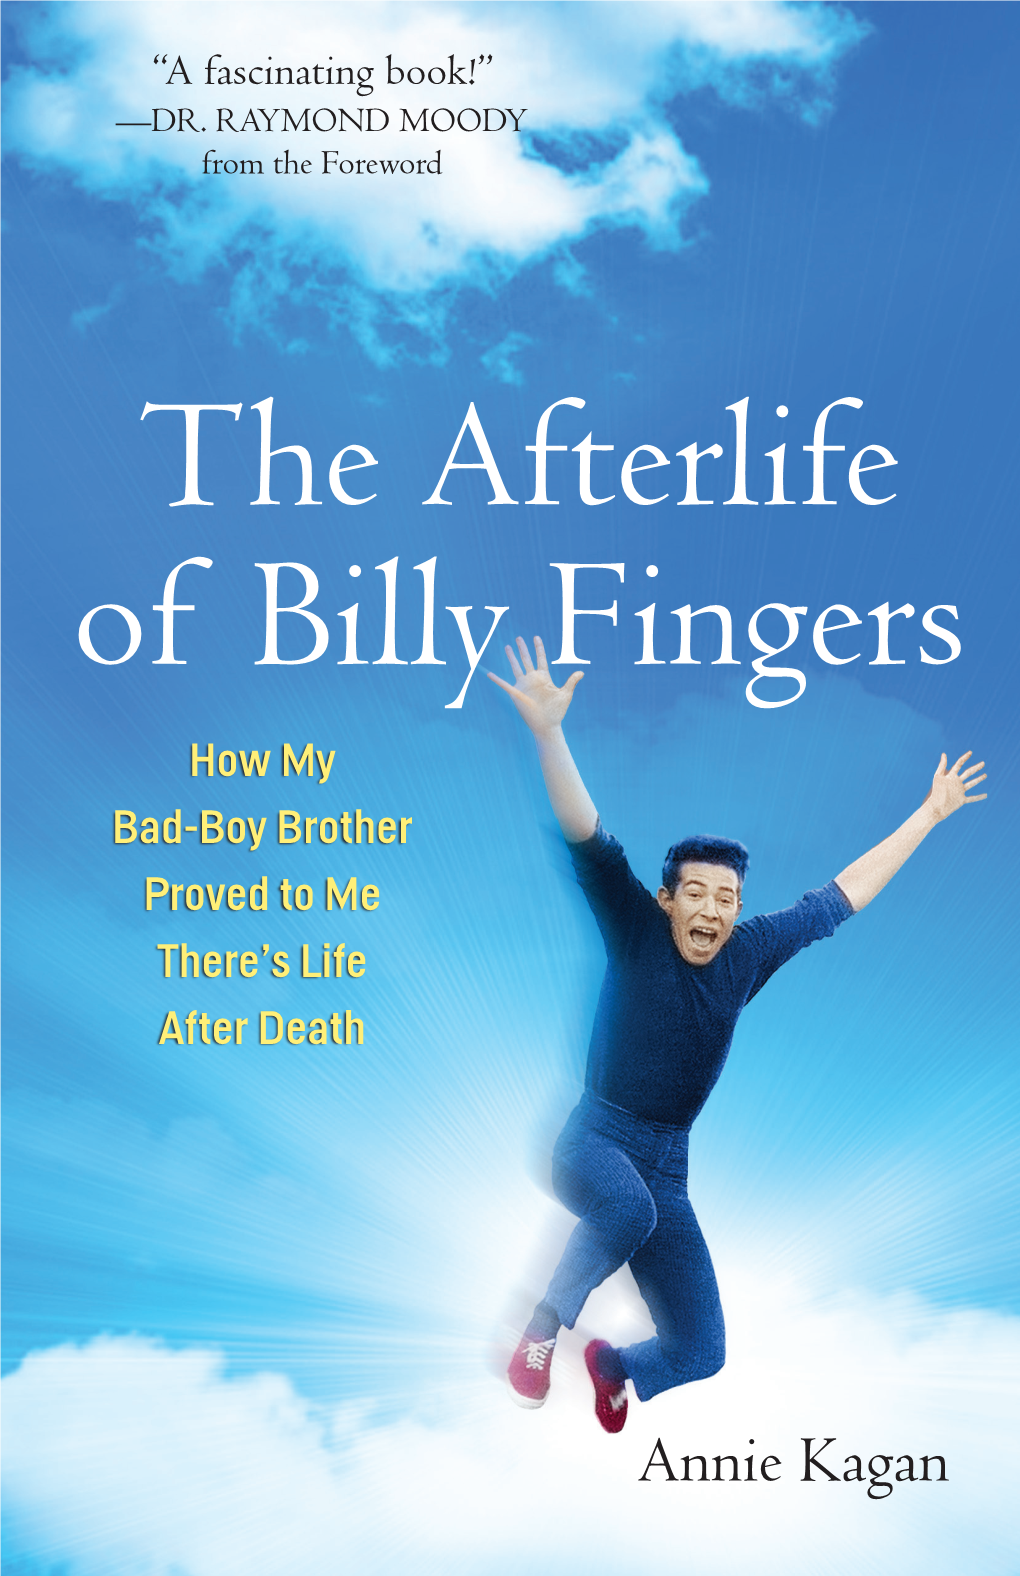 The Afterlife of Billy Fingers Is an Extraordinary Example of Extended After-Death Communication